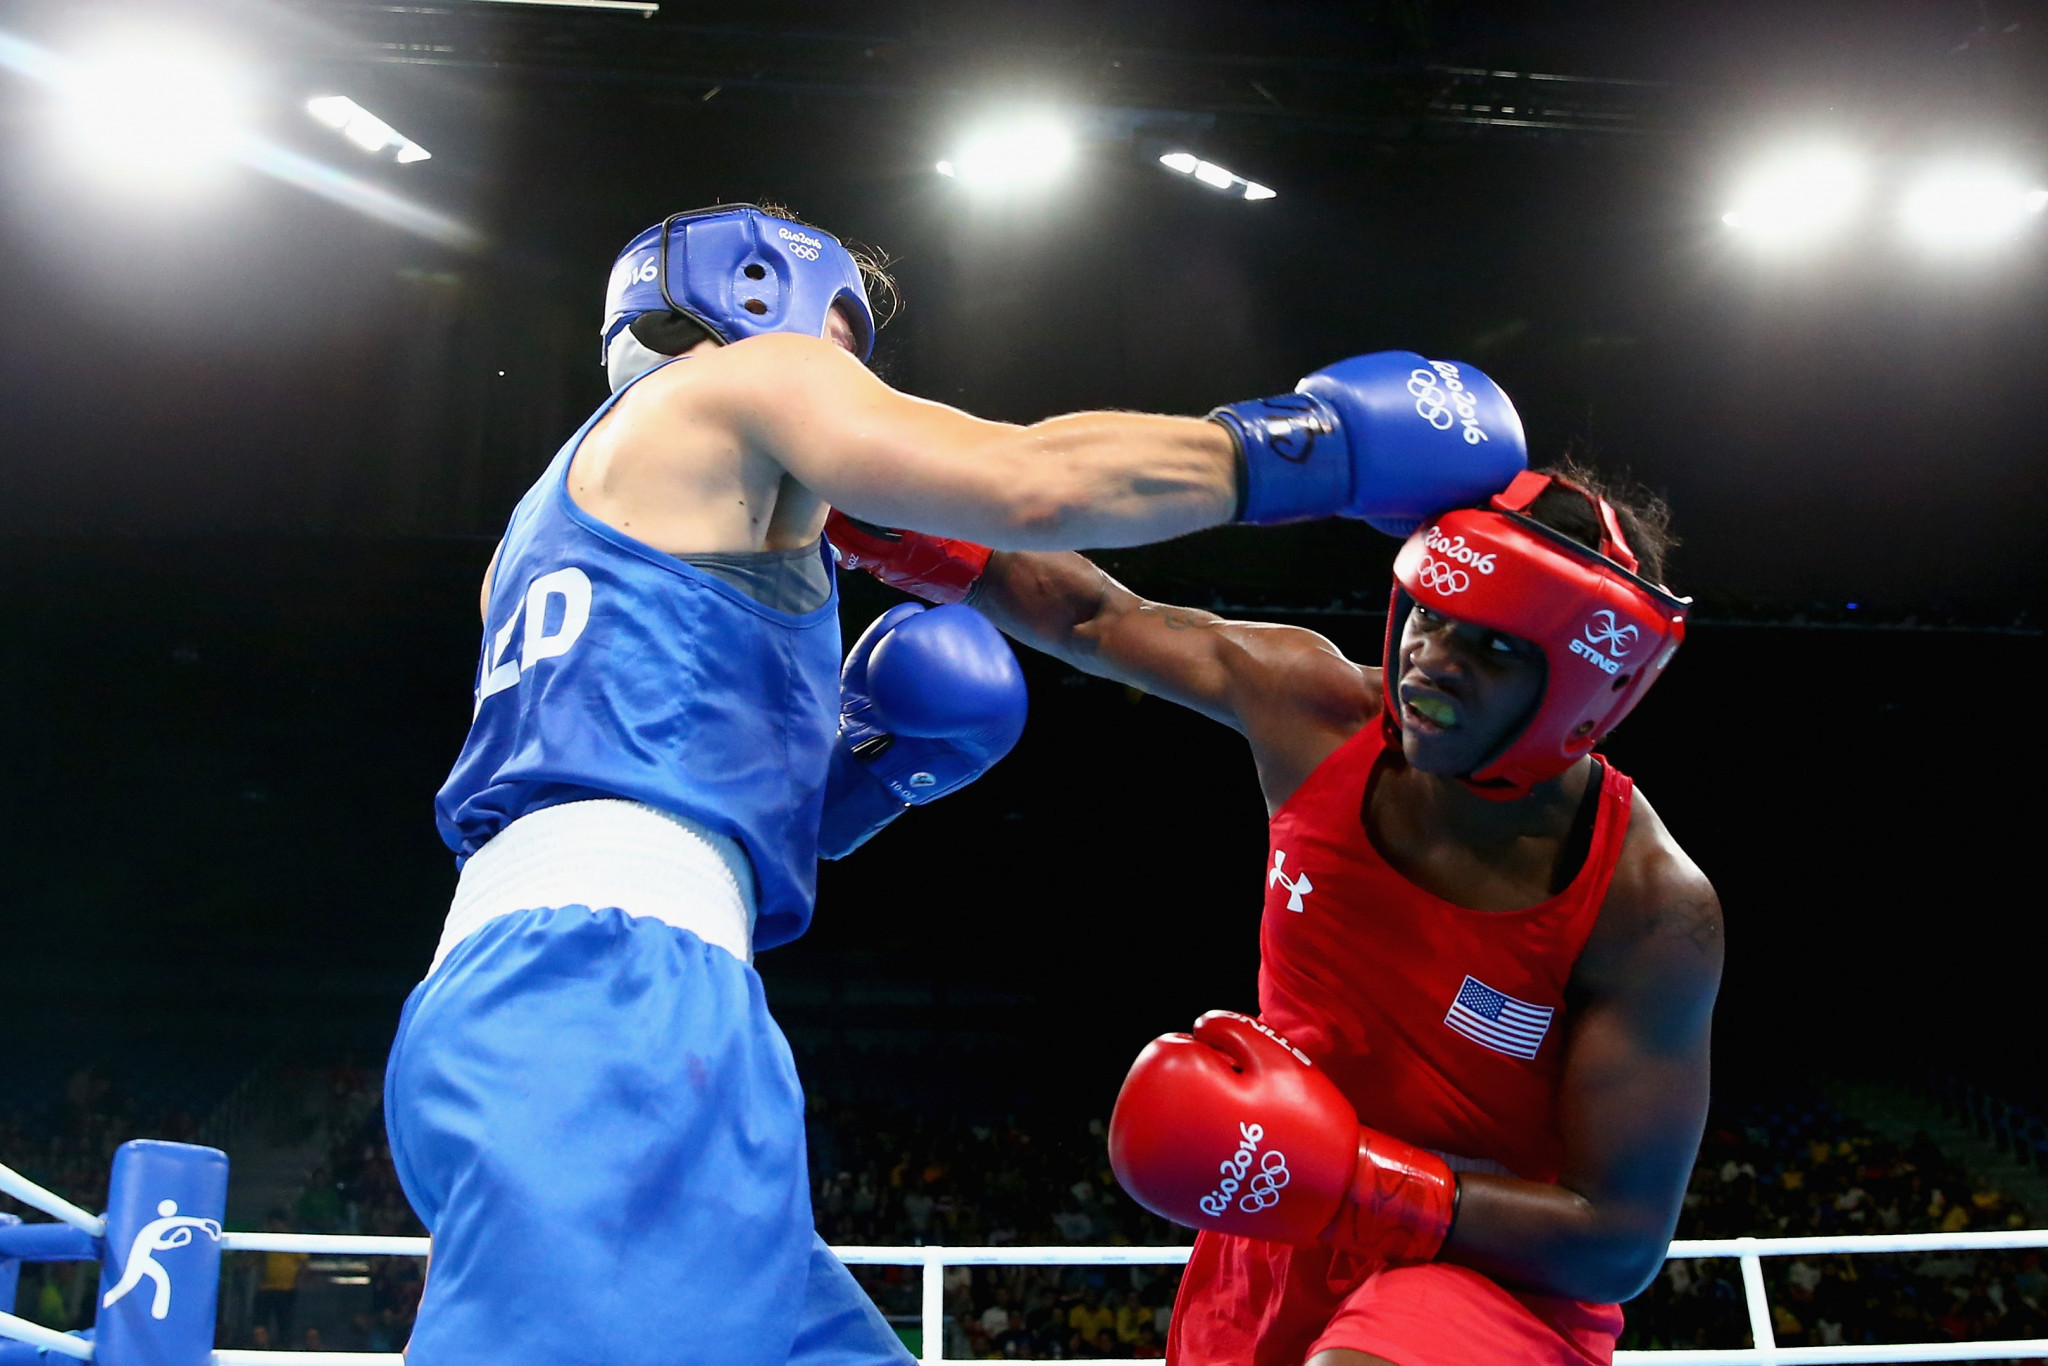 Achieving gender equality in boxing is considered essential for it to grow as a sport and an Olympic discipline ©Getty Images